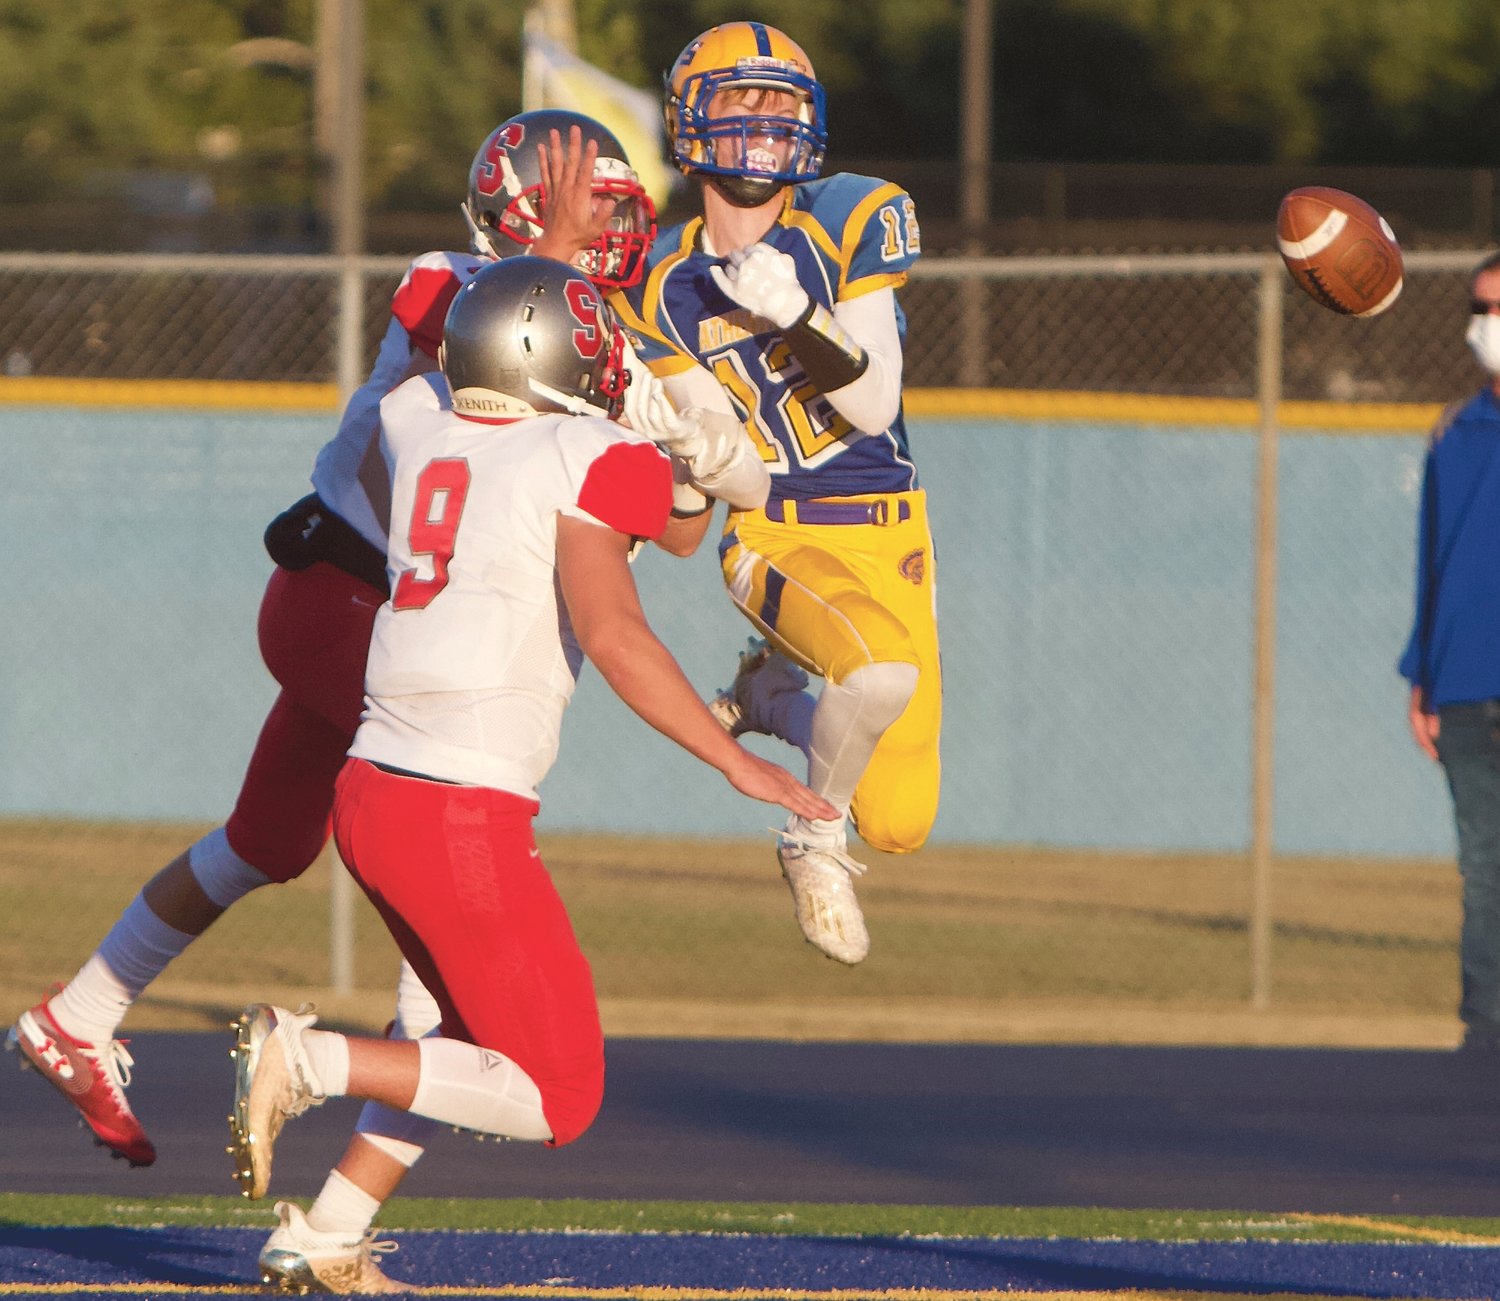 Crawfordsville's Andrew Martin goes up for a catch. The senior caught nine passes for 107 yards and a touchdown.